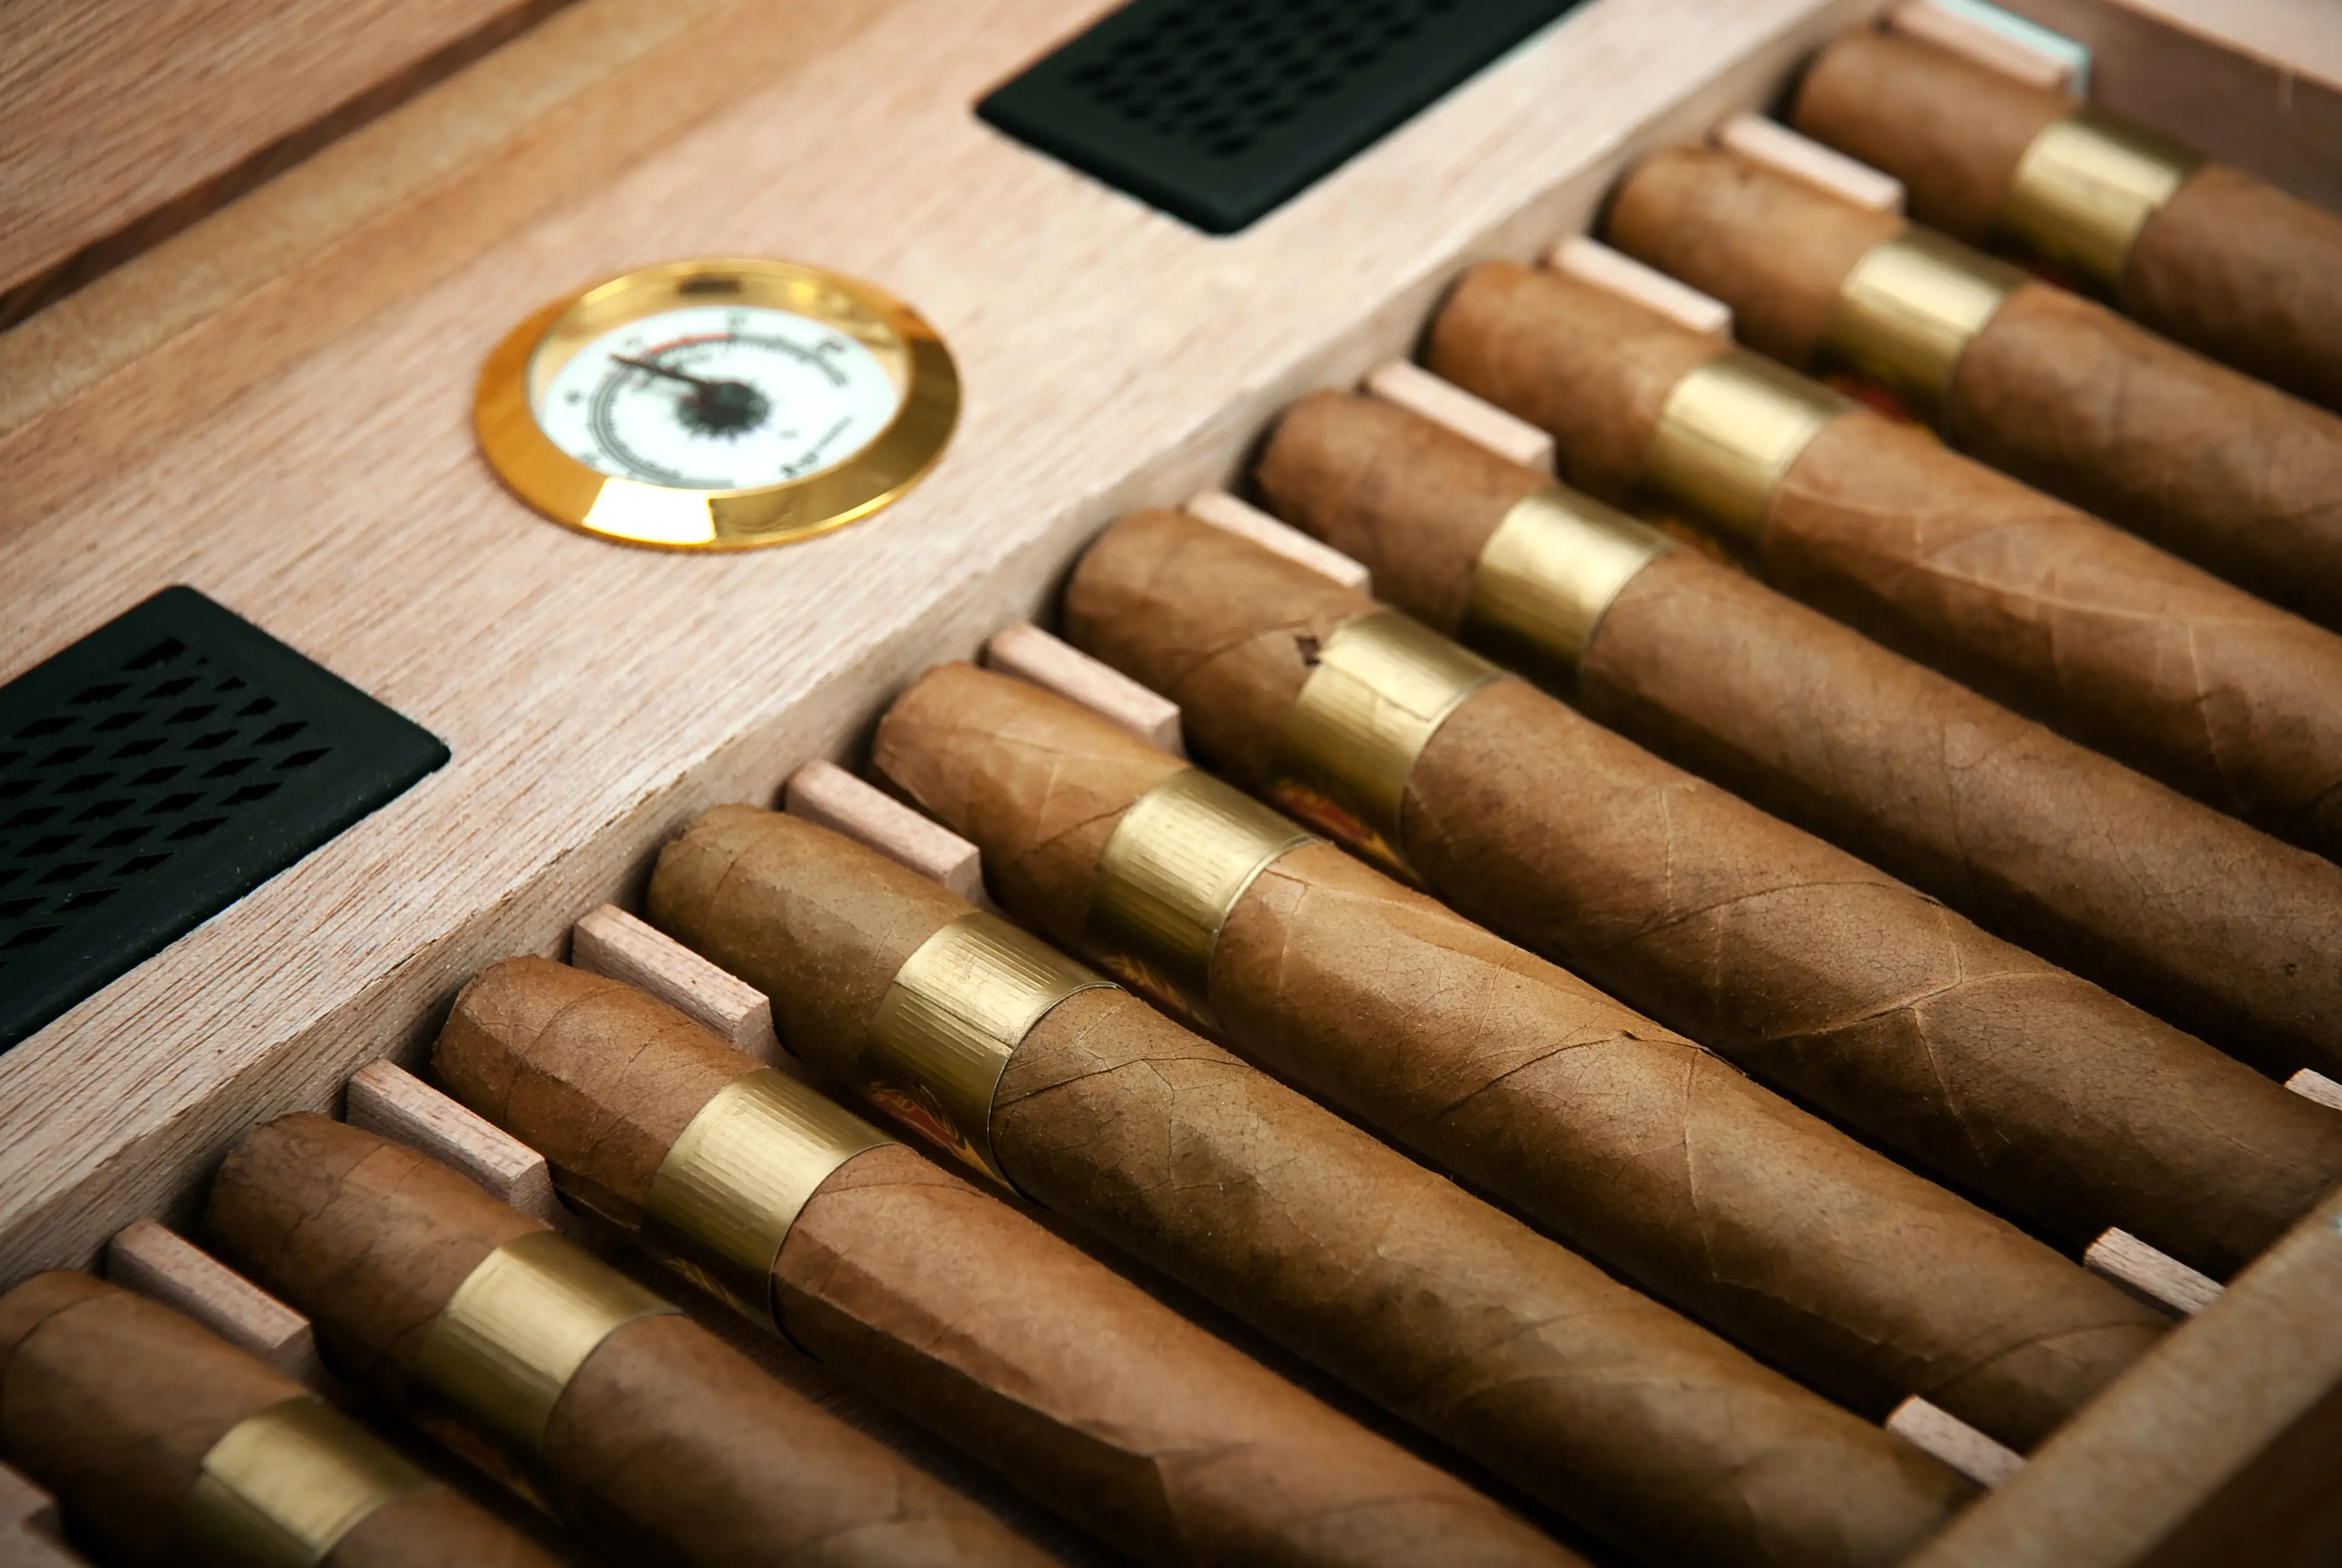 How NOT to Smuggle Cuban Cigars into the United States